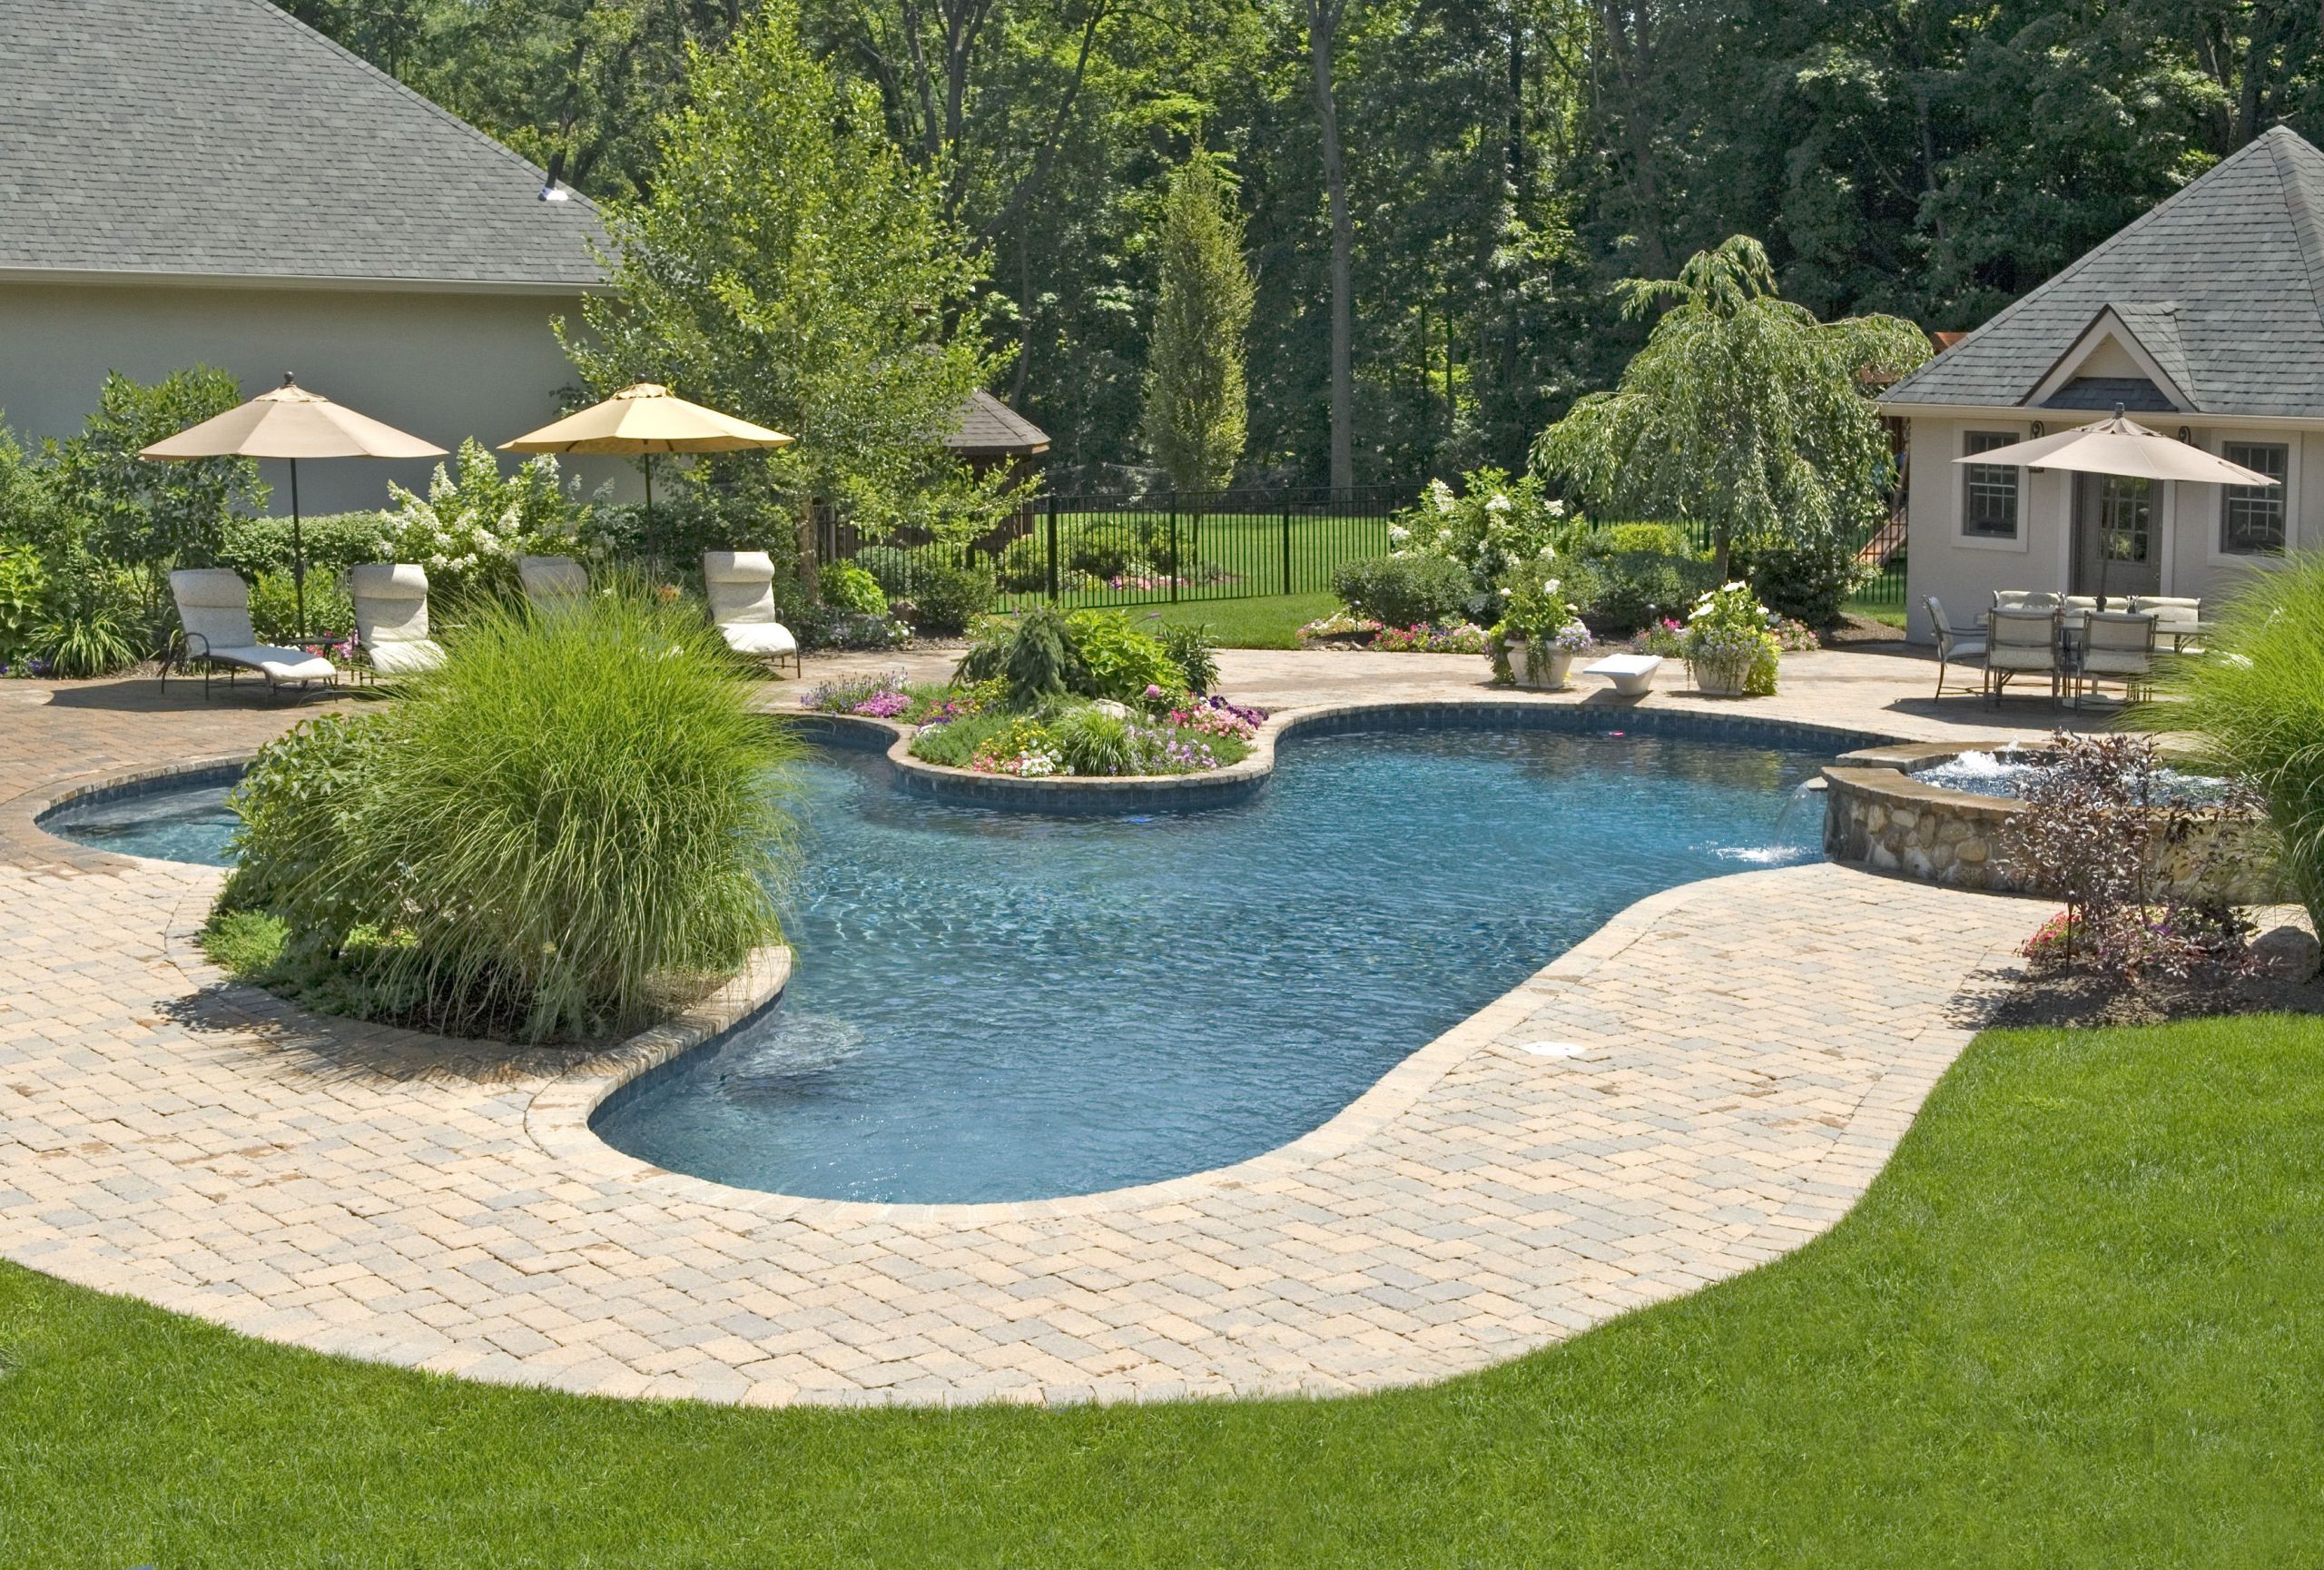 Backyard Pool Ideas
 Backyard Pool Ideas for a Better Relaxing Station to Try